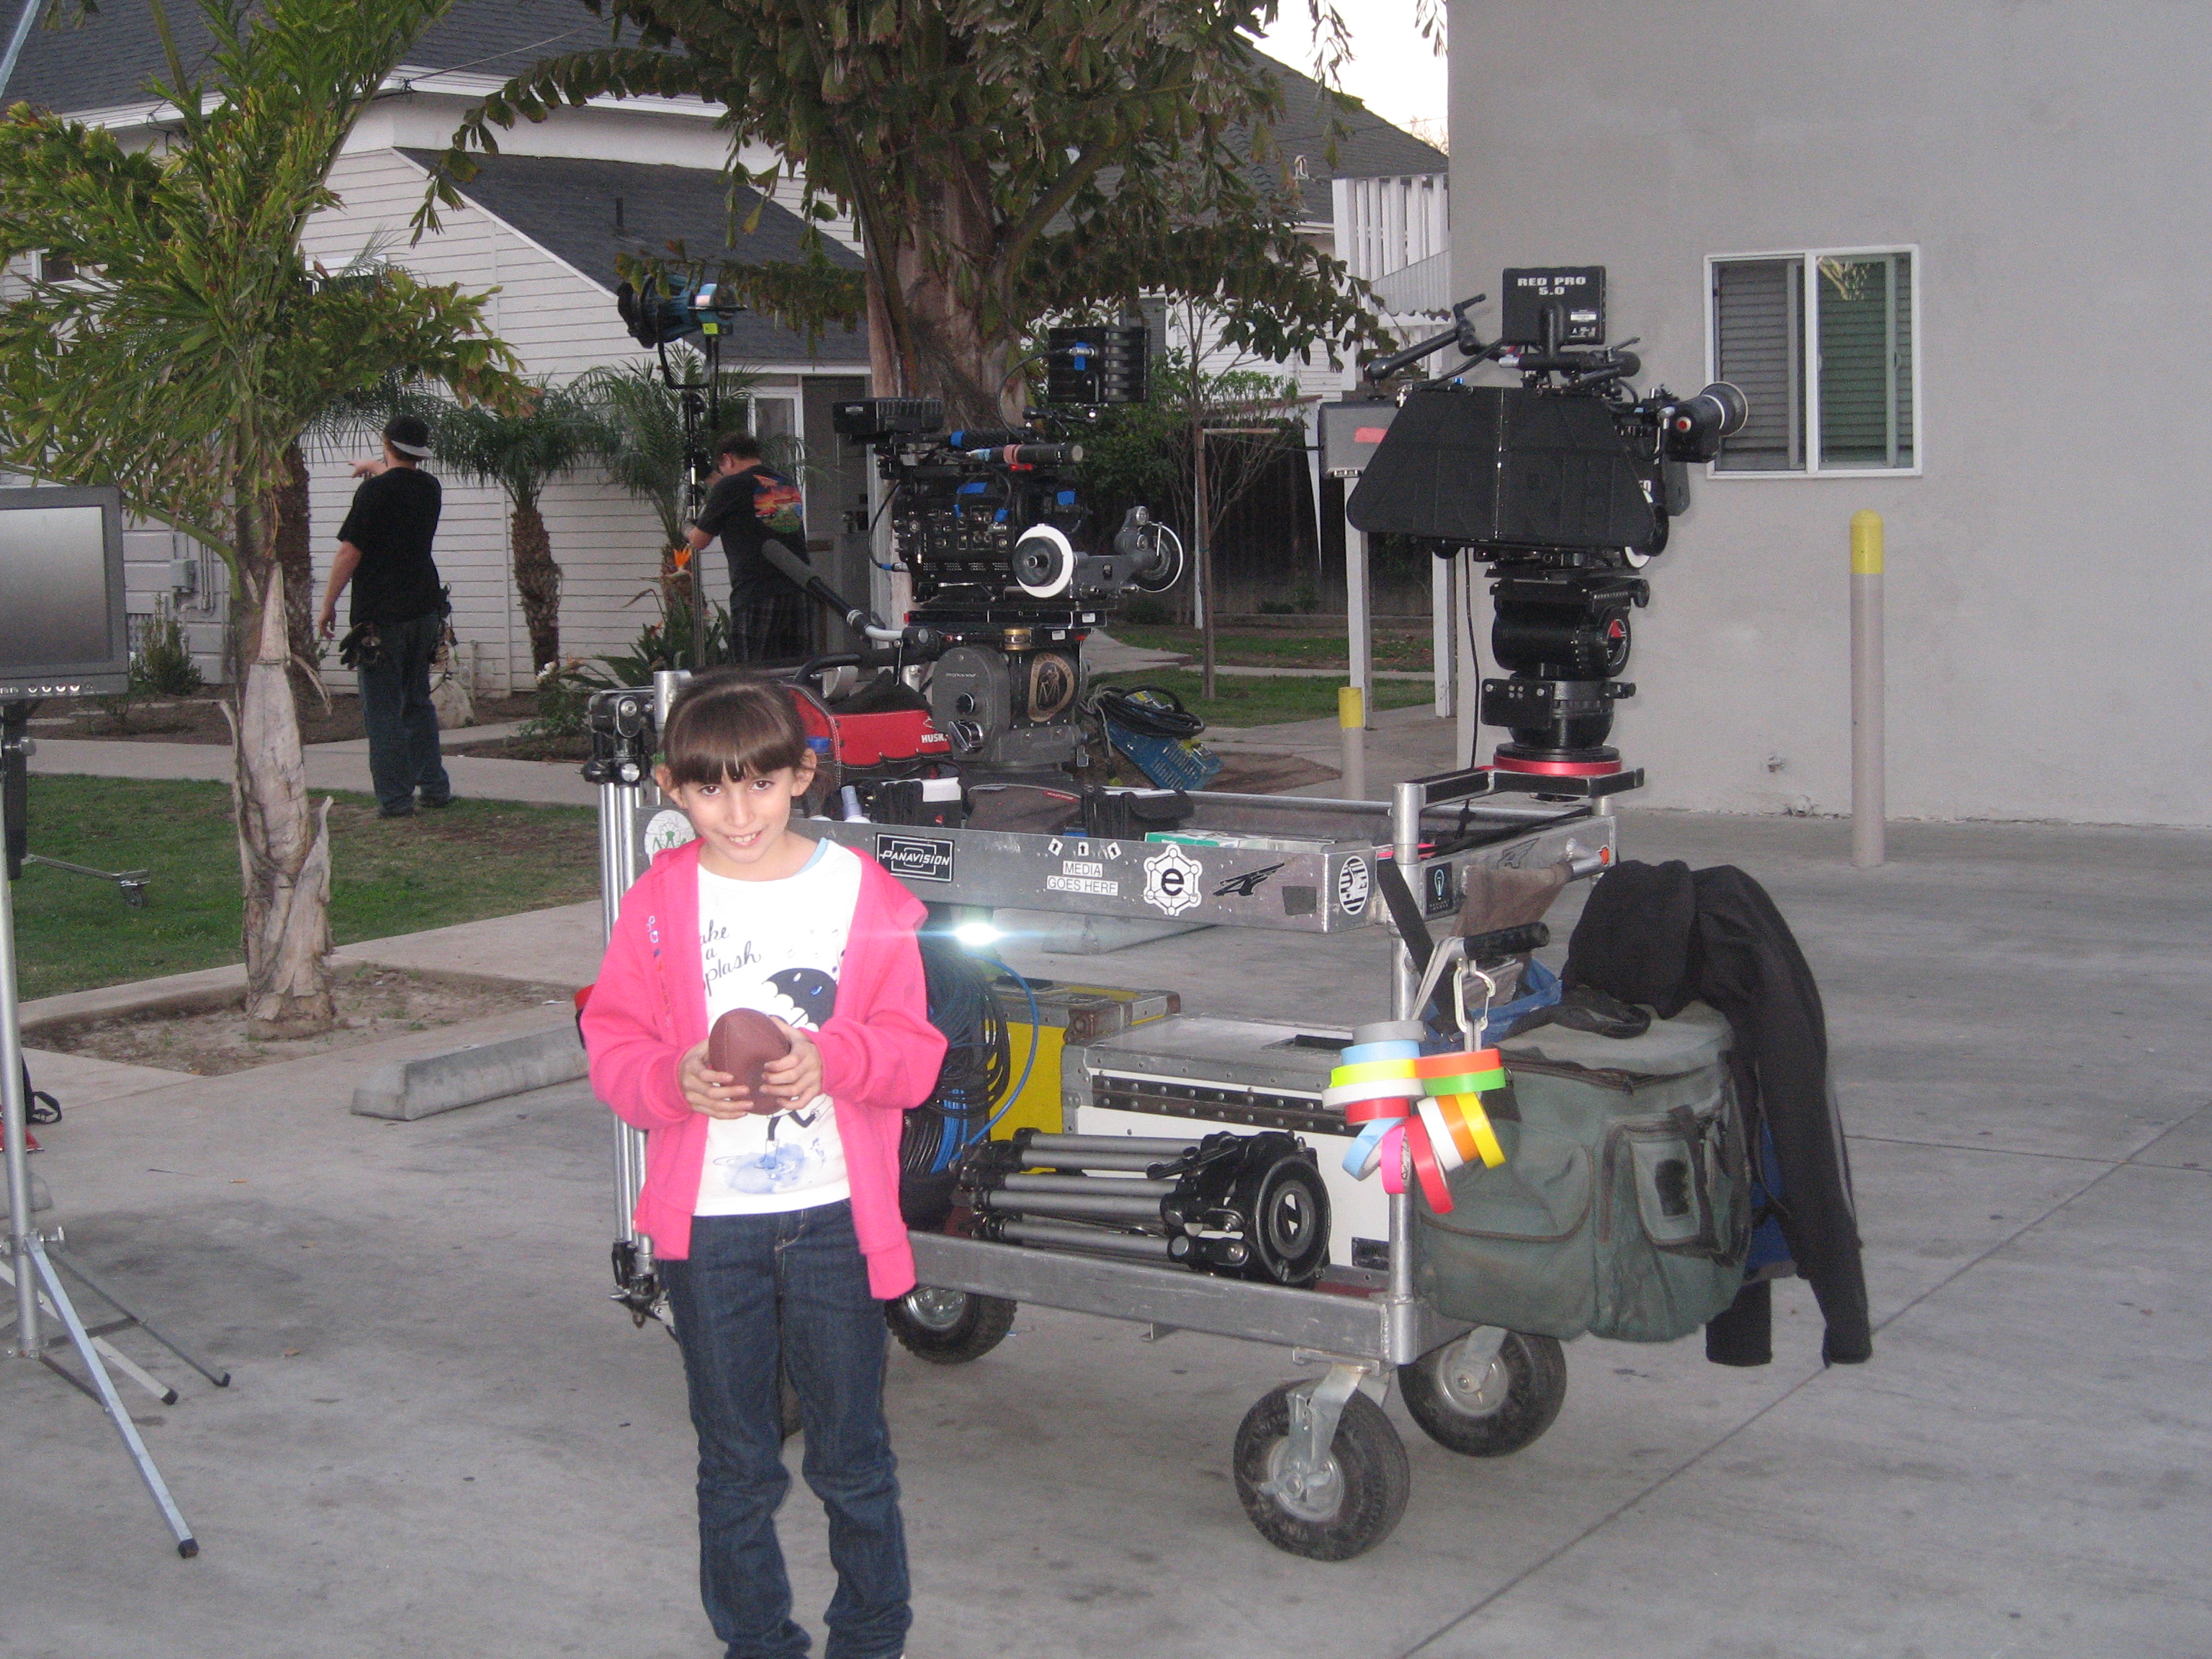 Natalie Miranda checking out the equipment prior to the night shoot,on the set of 